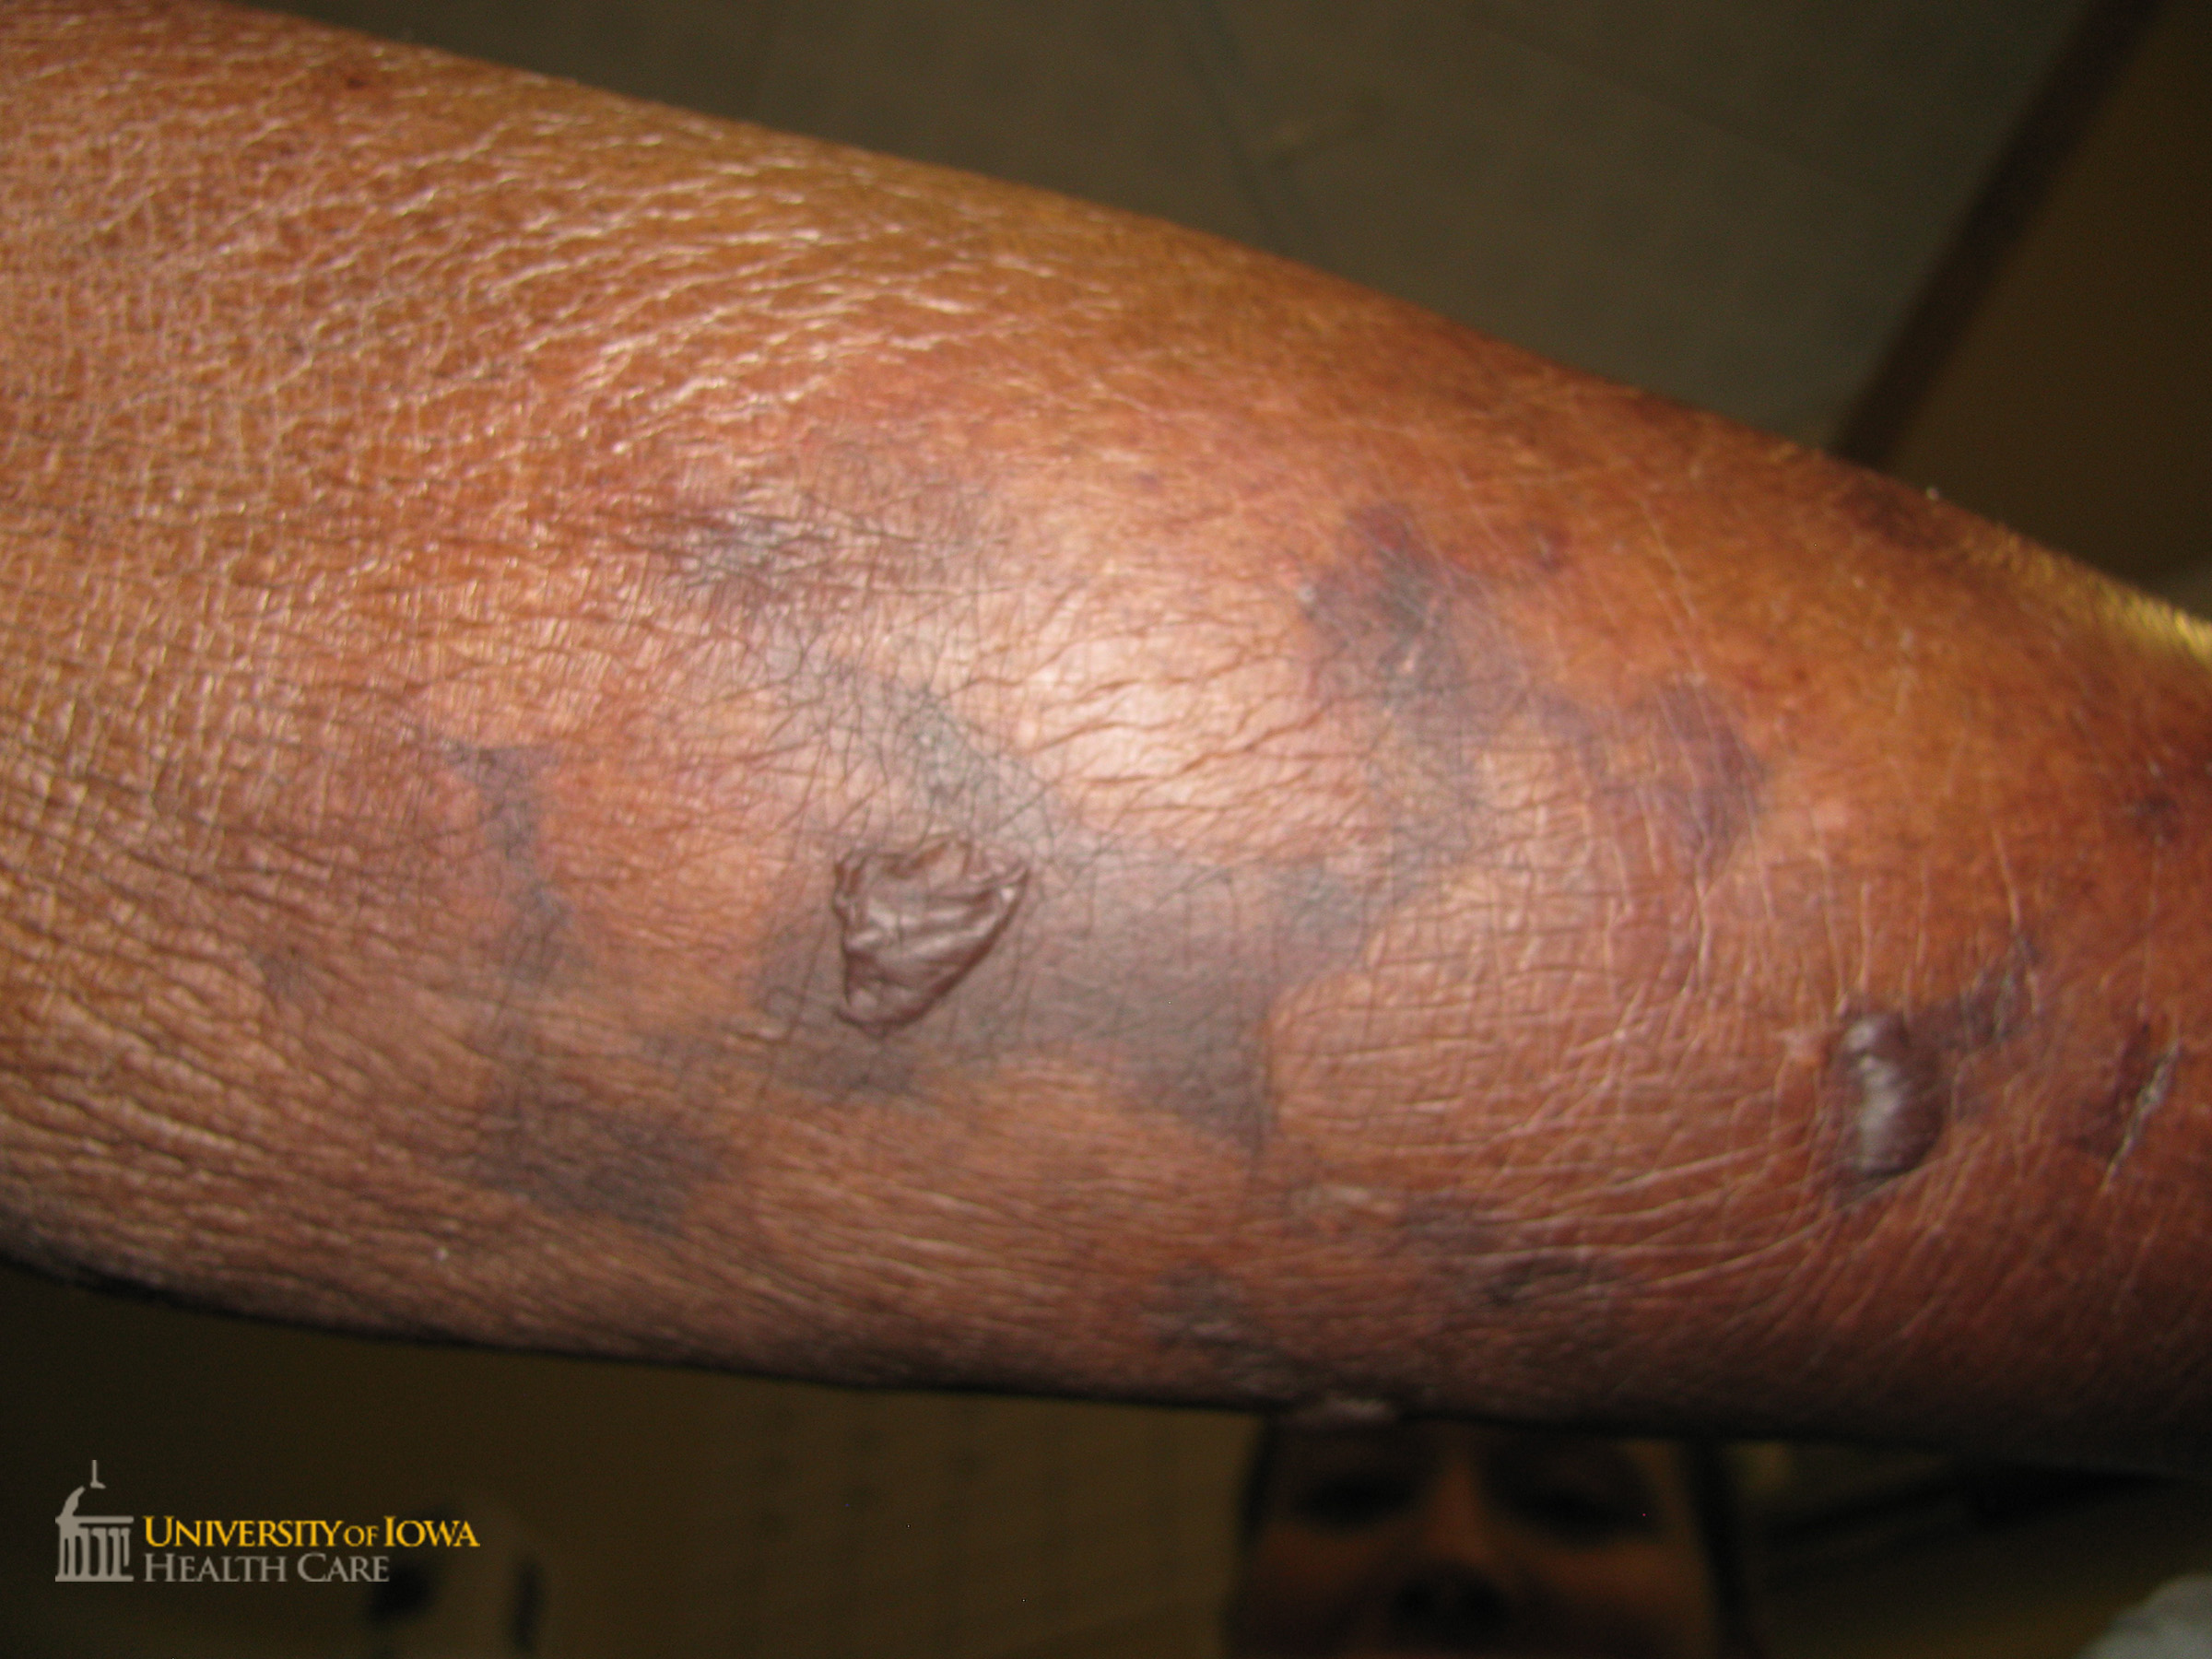 Retiform purpura on the leg and bulla on the leg. (click images for higher resolution).